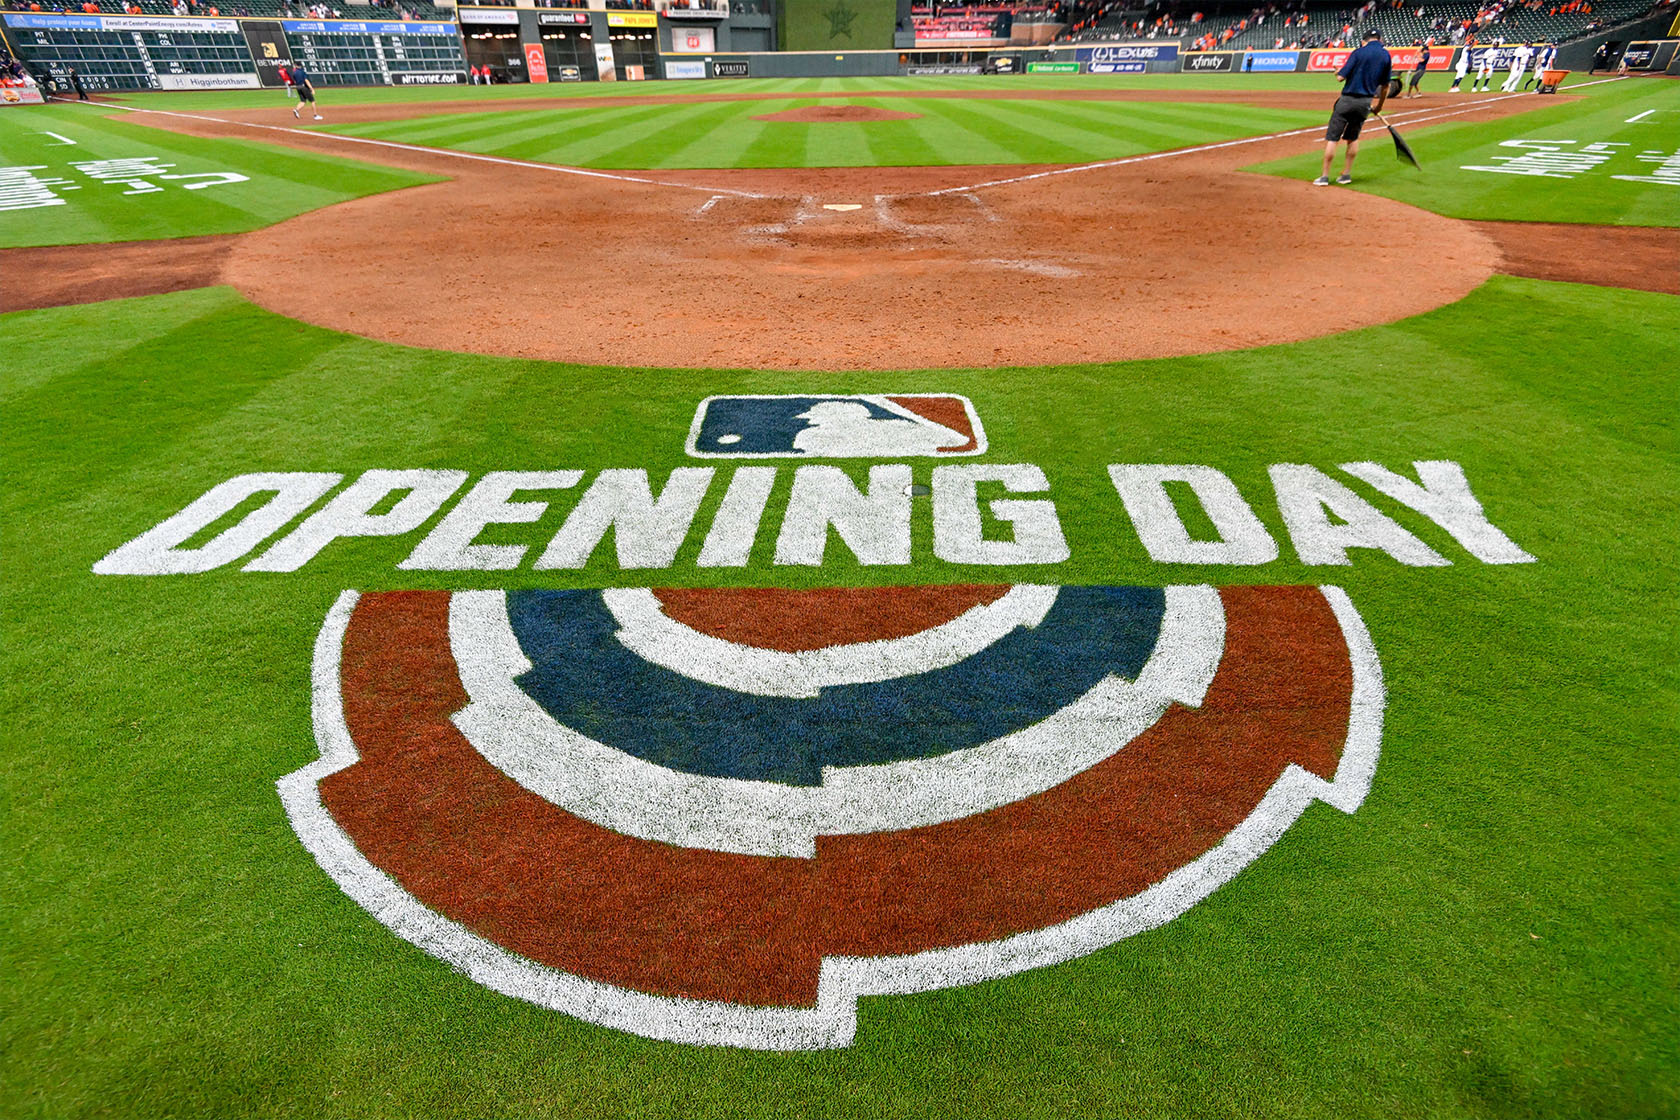 Astros vs White Sox: Opening day tickets are still available